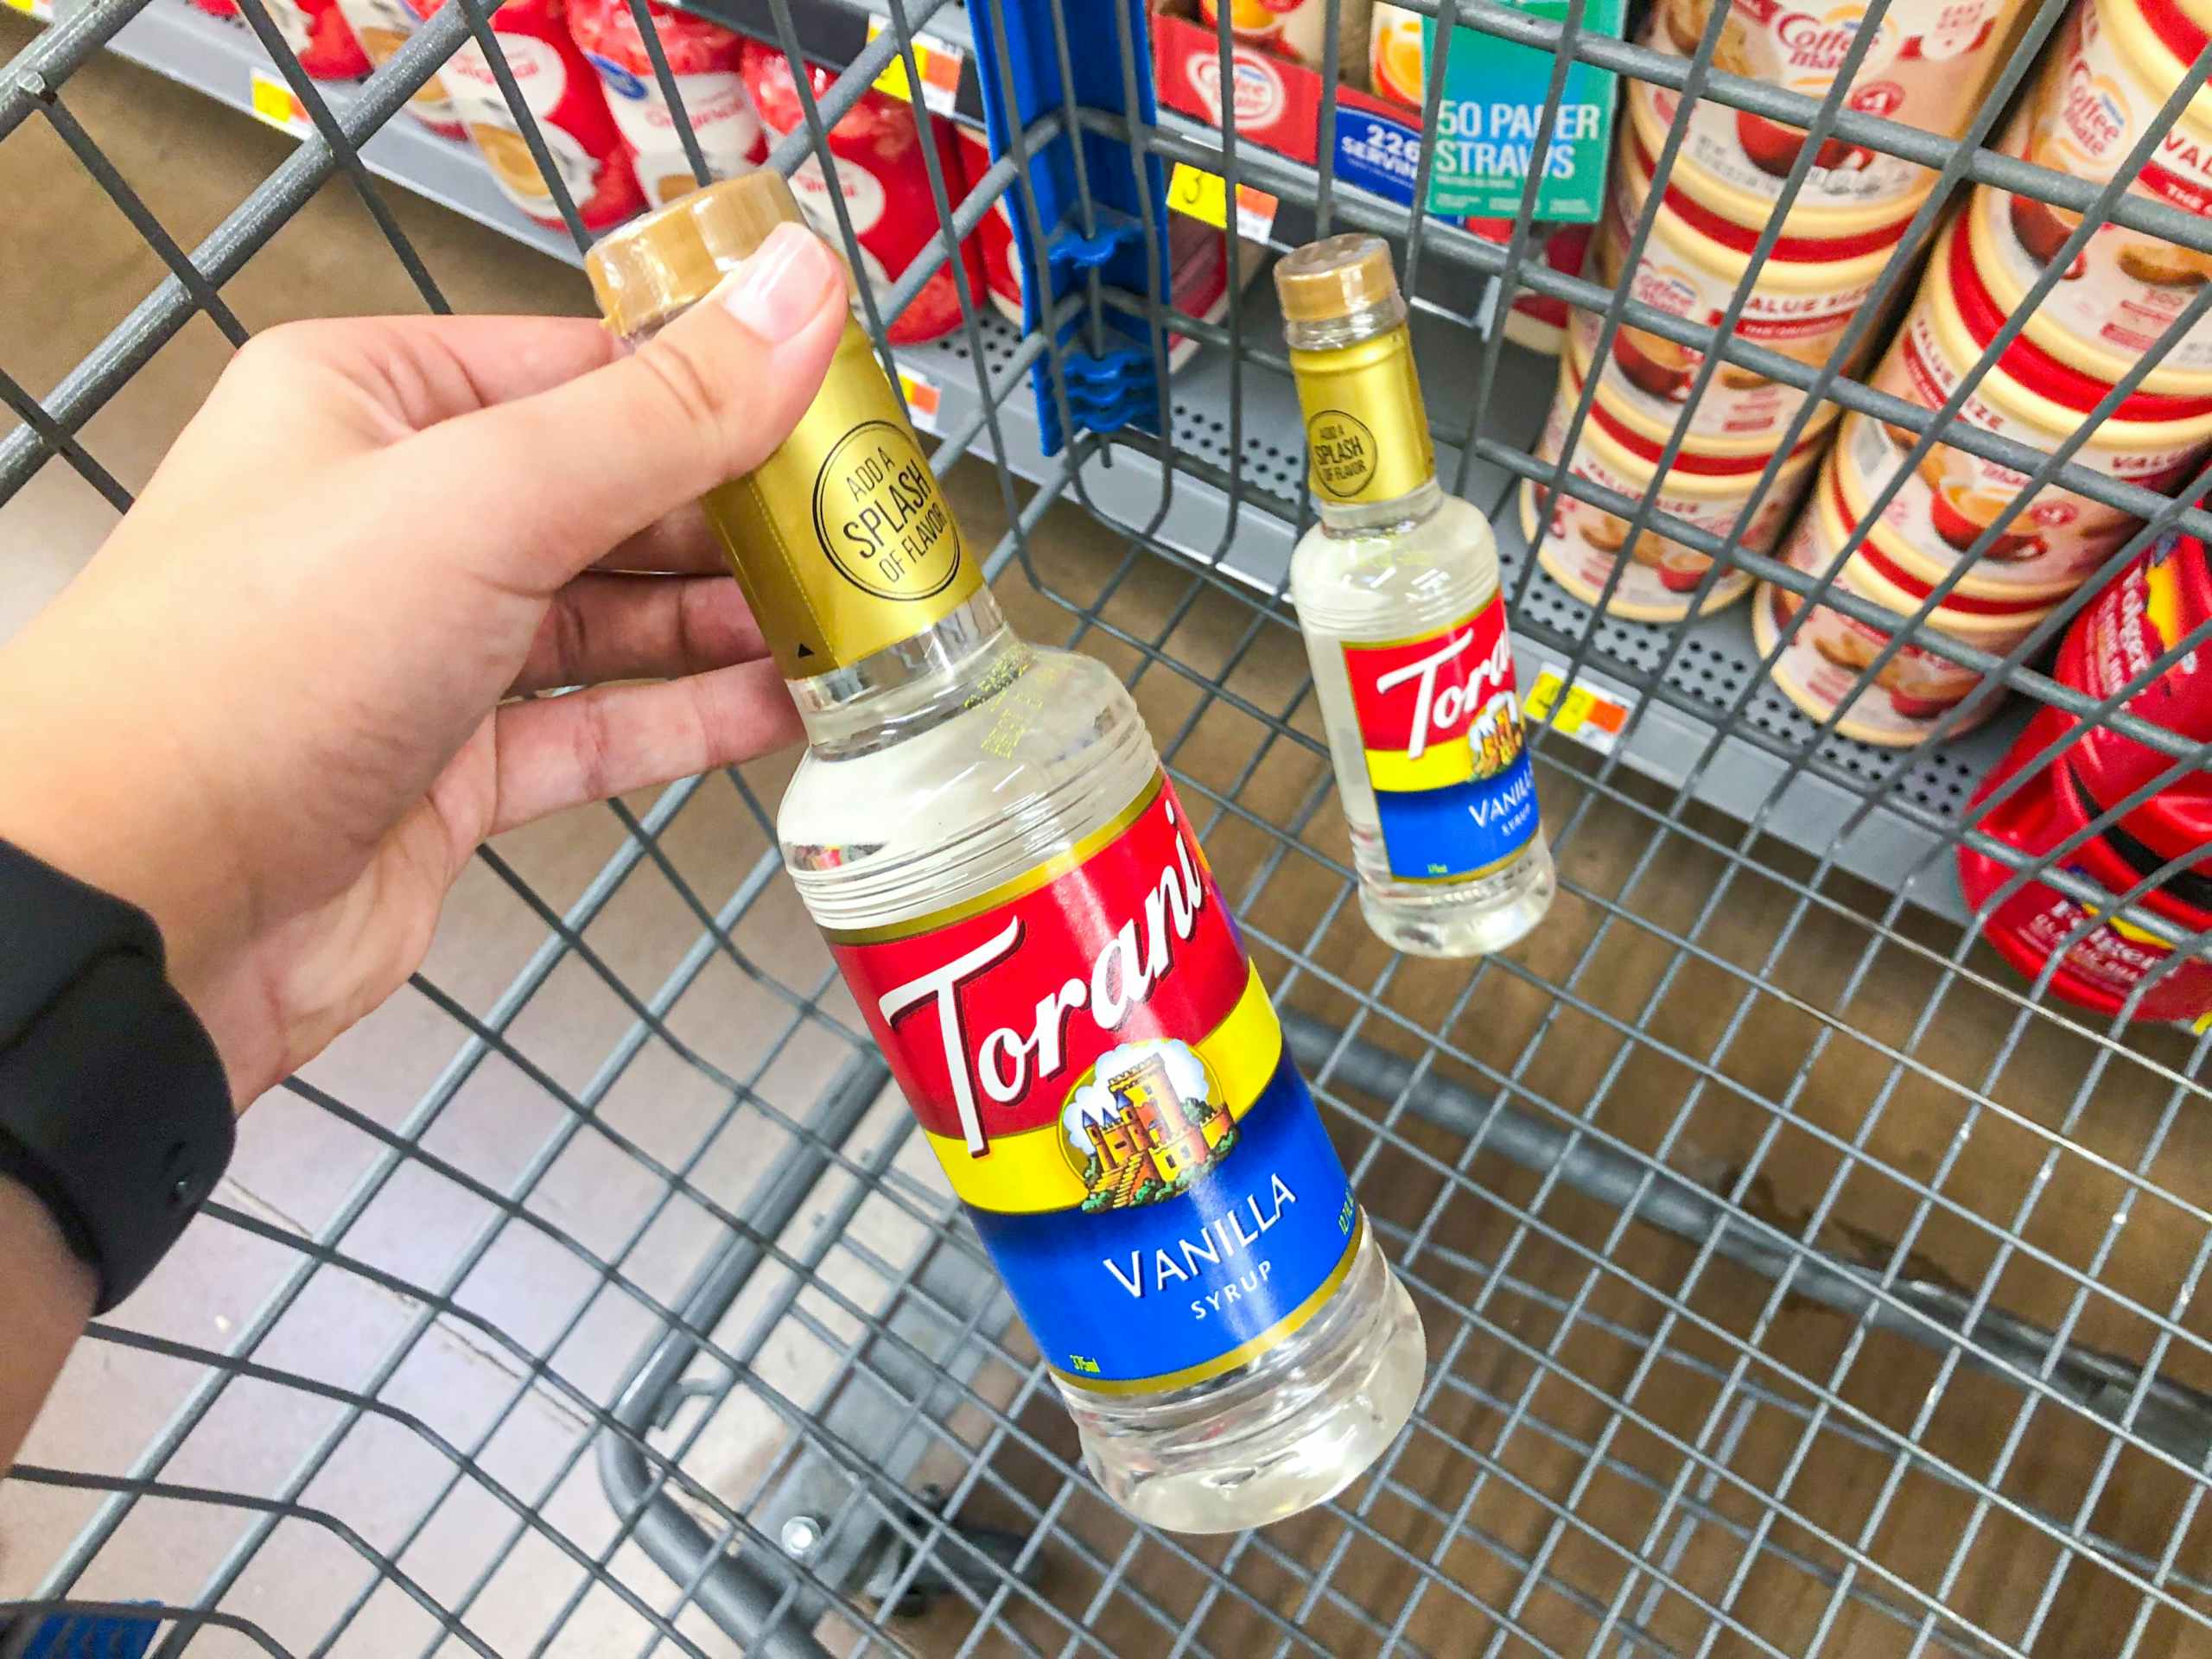 hand holding Torani bottle in front of another Torani bottle in a Walmart shopping cart